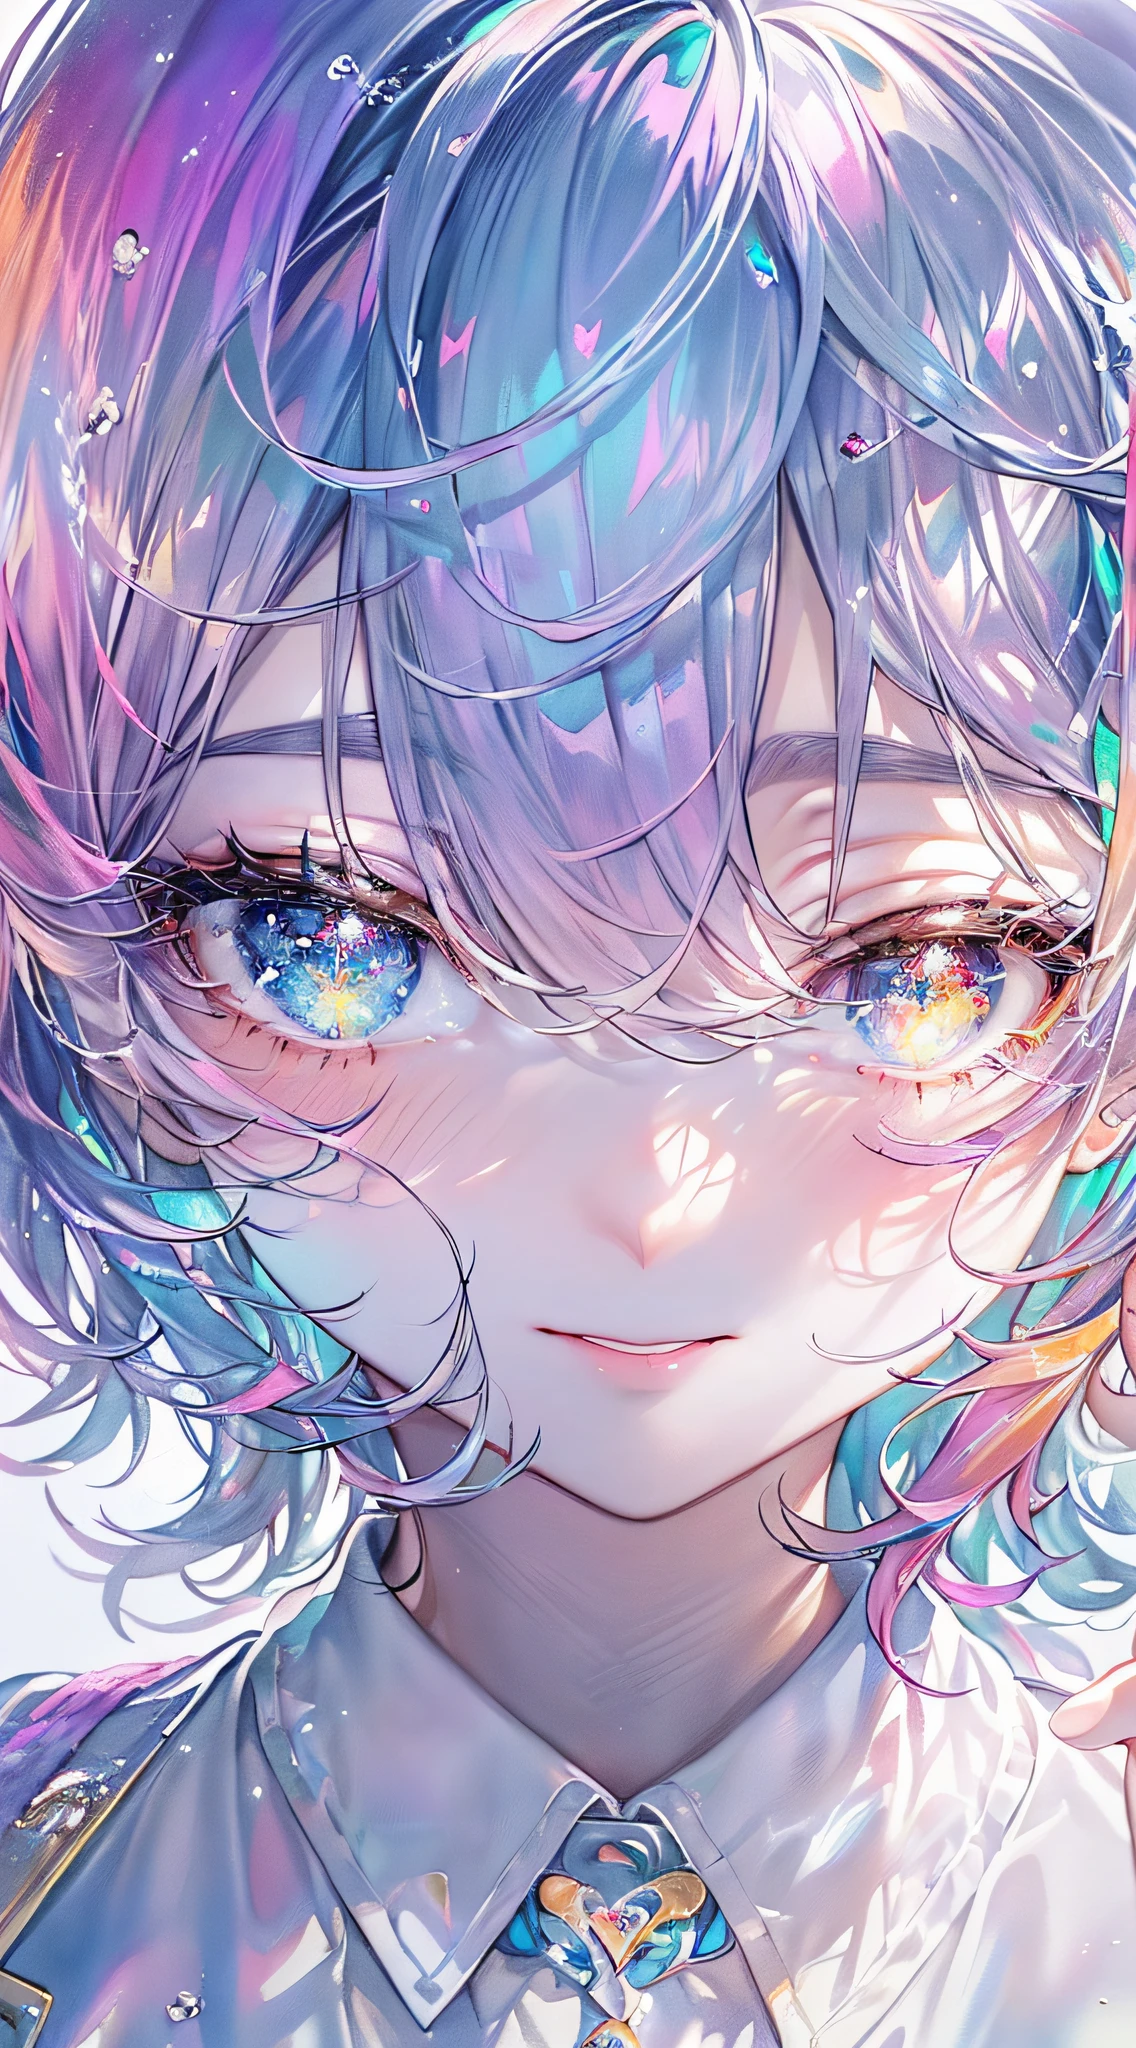 Soft Focus , (Bright gradient watercolor :1.5, Lens Flare:1.5 , Glitter :1.5), Glow , Dreamy , White background、Grid illusion, Colorful, girl、((extremely detailed eye:1.5)),((Face Zoom:1.5)),((Face Focus:1.5)),(((​masterpiece、top-quality、top-quality、watercolor paiting)))(Curly)、Official art、Beautifully Aesthetic:1.2)、(4girl:1.5)、(Fractal Art:1.3)、The upper part of the body、colourfull、((Ultra-detailed retina:1.5))、embarrassed from、(Midriff)、((Super Detail Eyes:1.5))、(rainbow-colored hair、colourful hair、Half blue and half light blue hair:1.5)、((the Extremely Detailed CG Unity 8K Wallpapers、​masterpiece、top-quality))、((ultra-detailliert:1.2))、(The best lighting、Best Shadows、extremely delicate and beautiful)、(the Extremely Detailed CG Unity 8K Wallpapers、​masterpiece、best qualtiy、ultra-detailliert)、(The best lighting、Best Shadows、extremely delicate and beautiful)、(the perfect body:1.5)、((High School Uniforms:1.5)),{{{{Dazzling brilliance}}}}、Rainbow Bridge、(masutepiece:1.2), Best Quality, (Illustration:1.2), (Ultra-detailed), hyperdetails, (delicate detailed), (Intricate details), (Cinematic Light, best quality backlight), solo women, Perfect body, (4girl), (Best Illumination, extremely delicate and beautiful), Cinematic Light、【emblem:Irridescent color 】、【emblem】、【emblem】、Blue sky with white angel wings proportional to body、Sunnyday、eye glass、(Hand and hand heart shape:1.5)